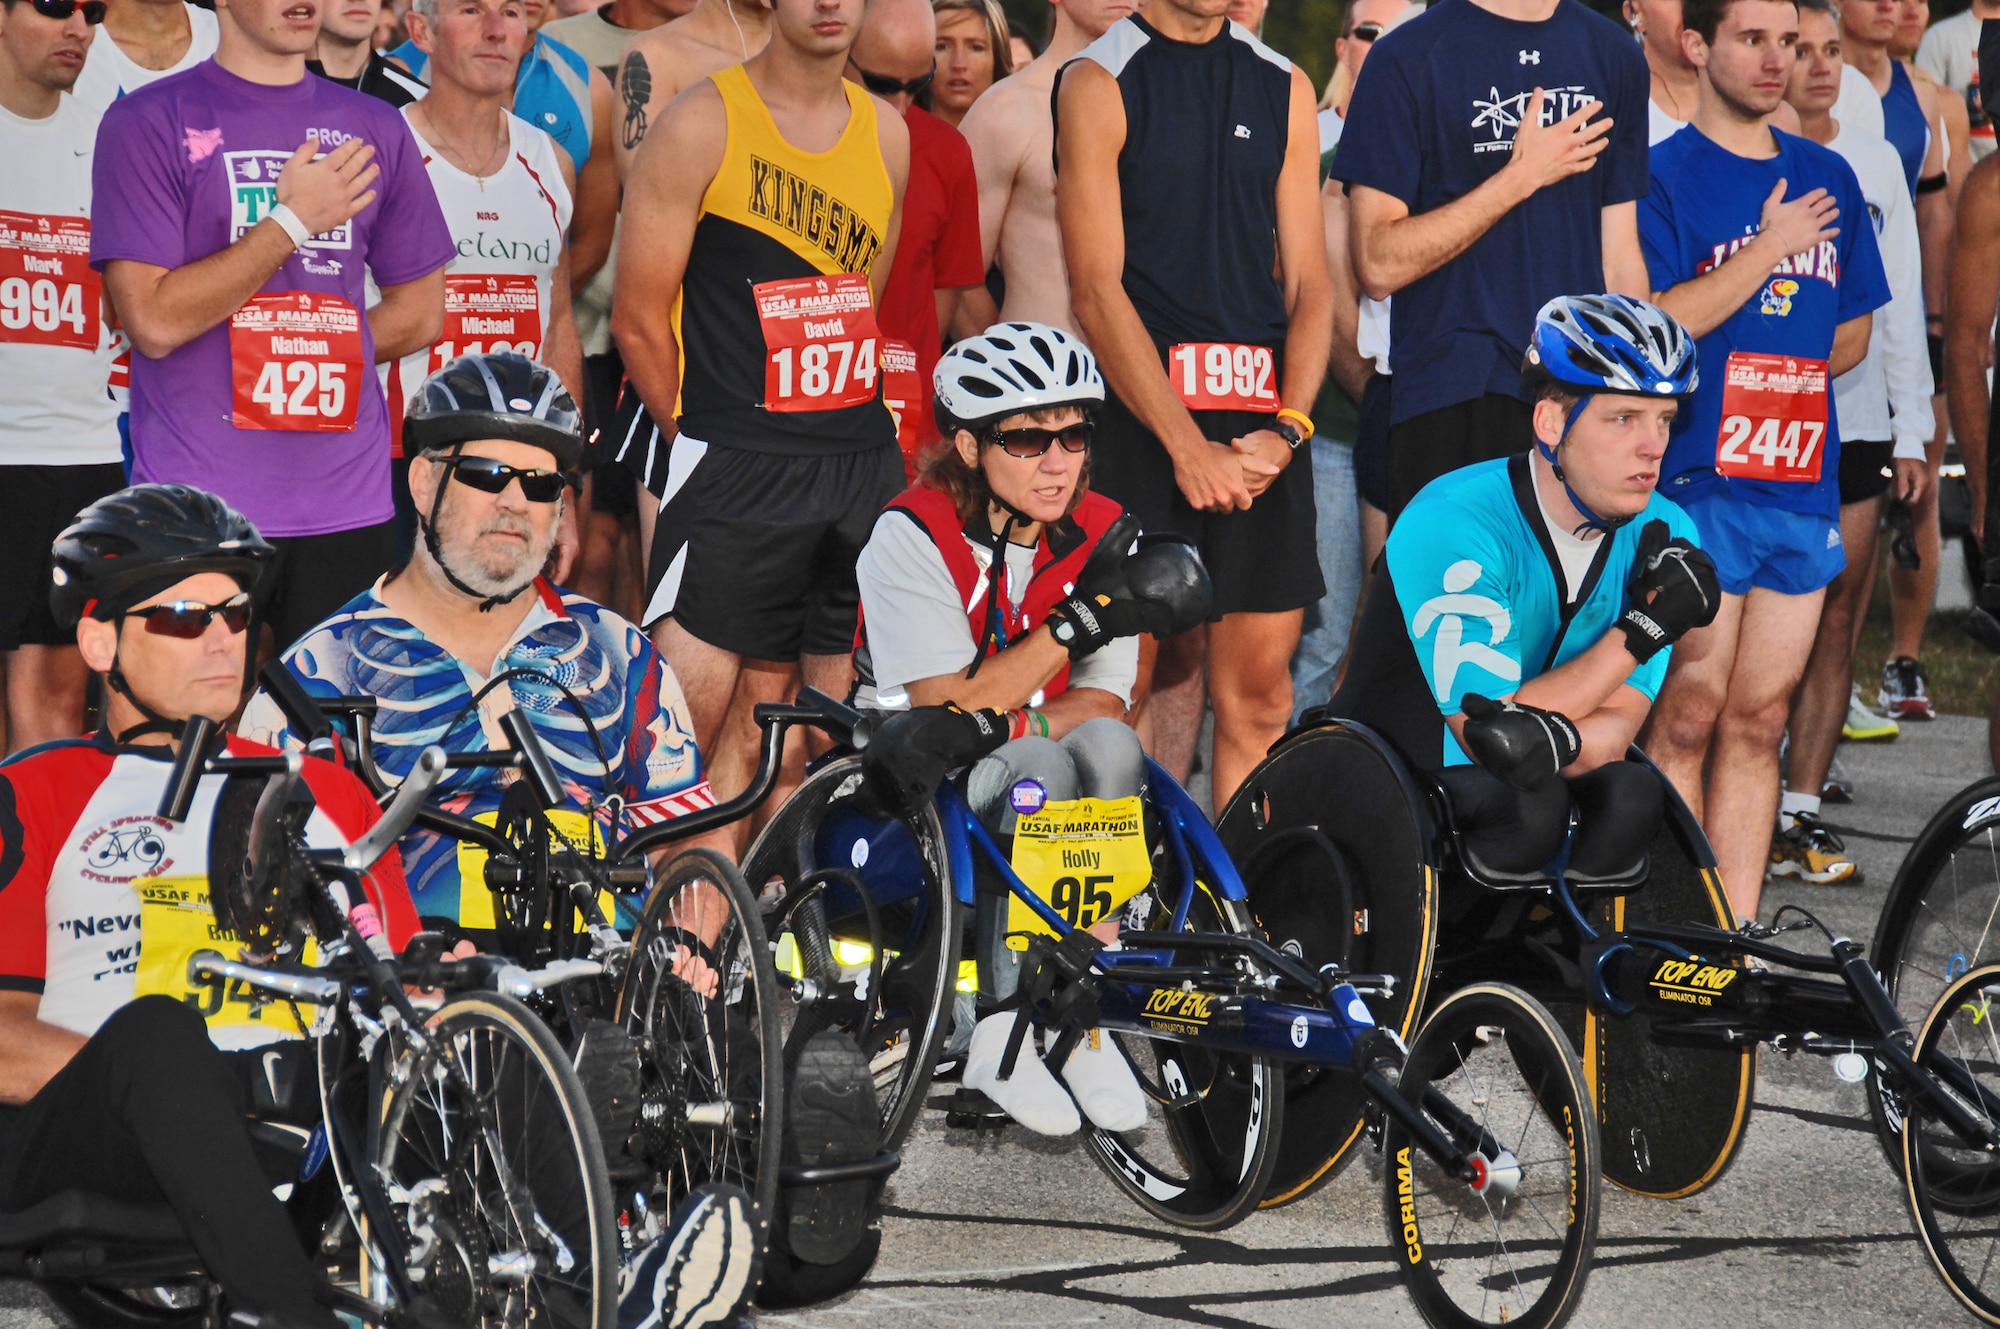 Wheel racers and runners line up at the starting line during opening ceremonies for the U.S. Air Force Marathon Sept. 19 at Wright-Patterson Air Force Base, Ohio. A record 9,969 runners participated in events which included 5K and 10K races, a half marathon and full marathon. (Air Force photo/Ben Strasser)